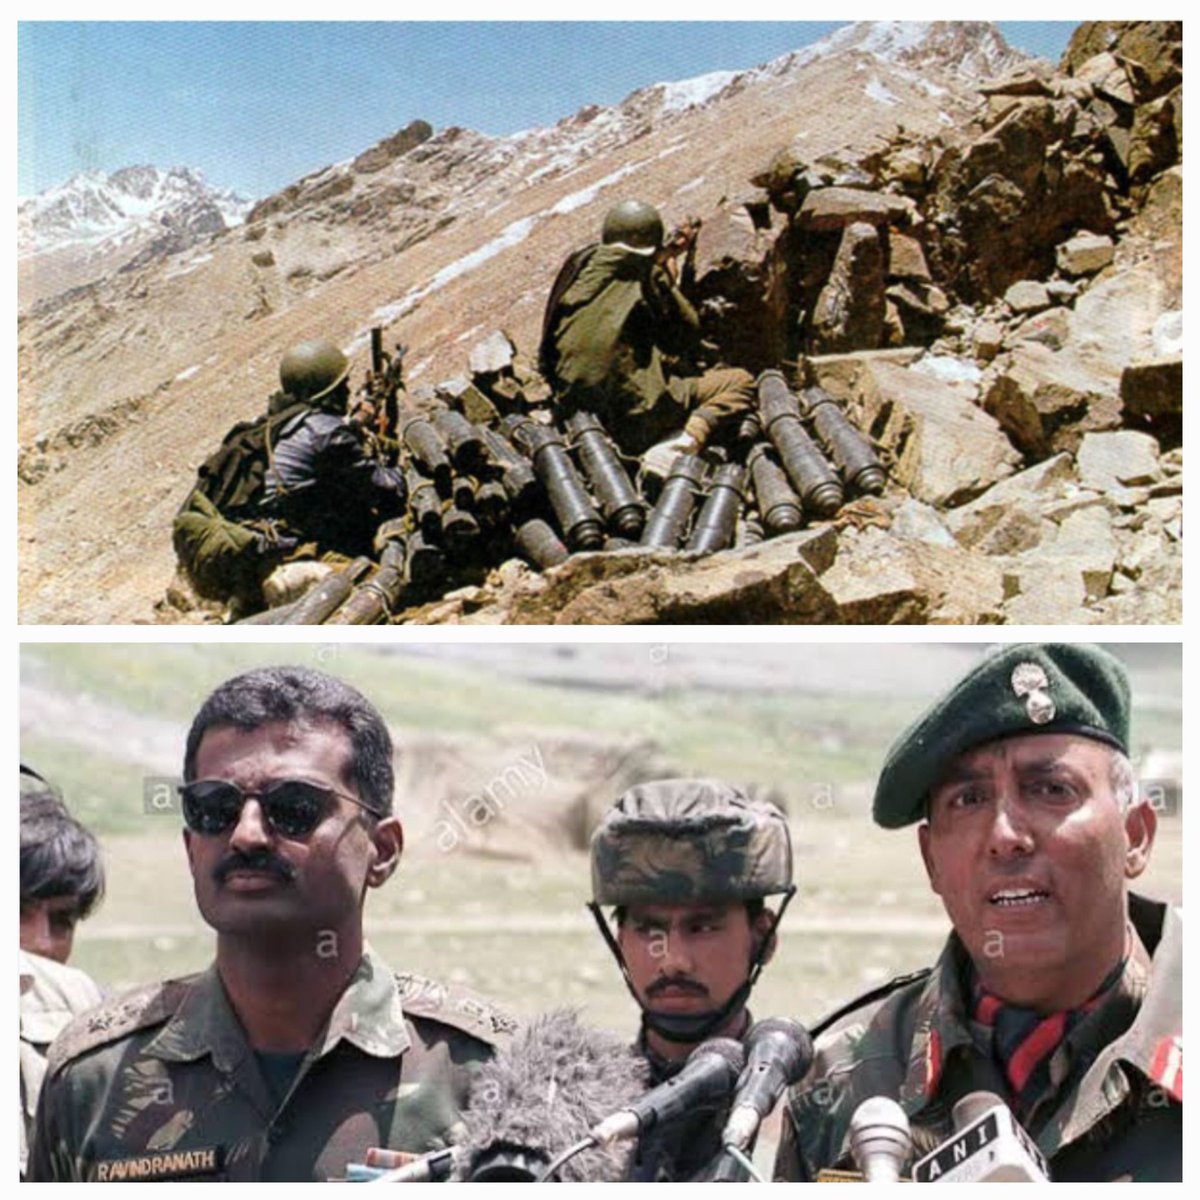 #KnowOurHeroes #KargilWar
By this time in 1999, our Veers had wrested and unfurled the Tiranga on Tololing Top - the strategic peak vital to dominate the Srinagar Leh highway... a lifeline for India

This was the turning point in Kargil War

Two among many exceptional Commanding…